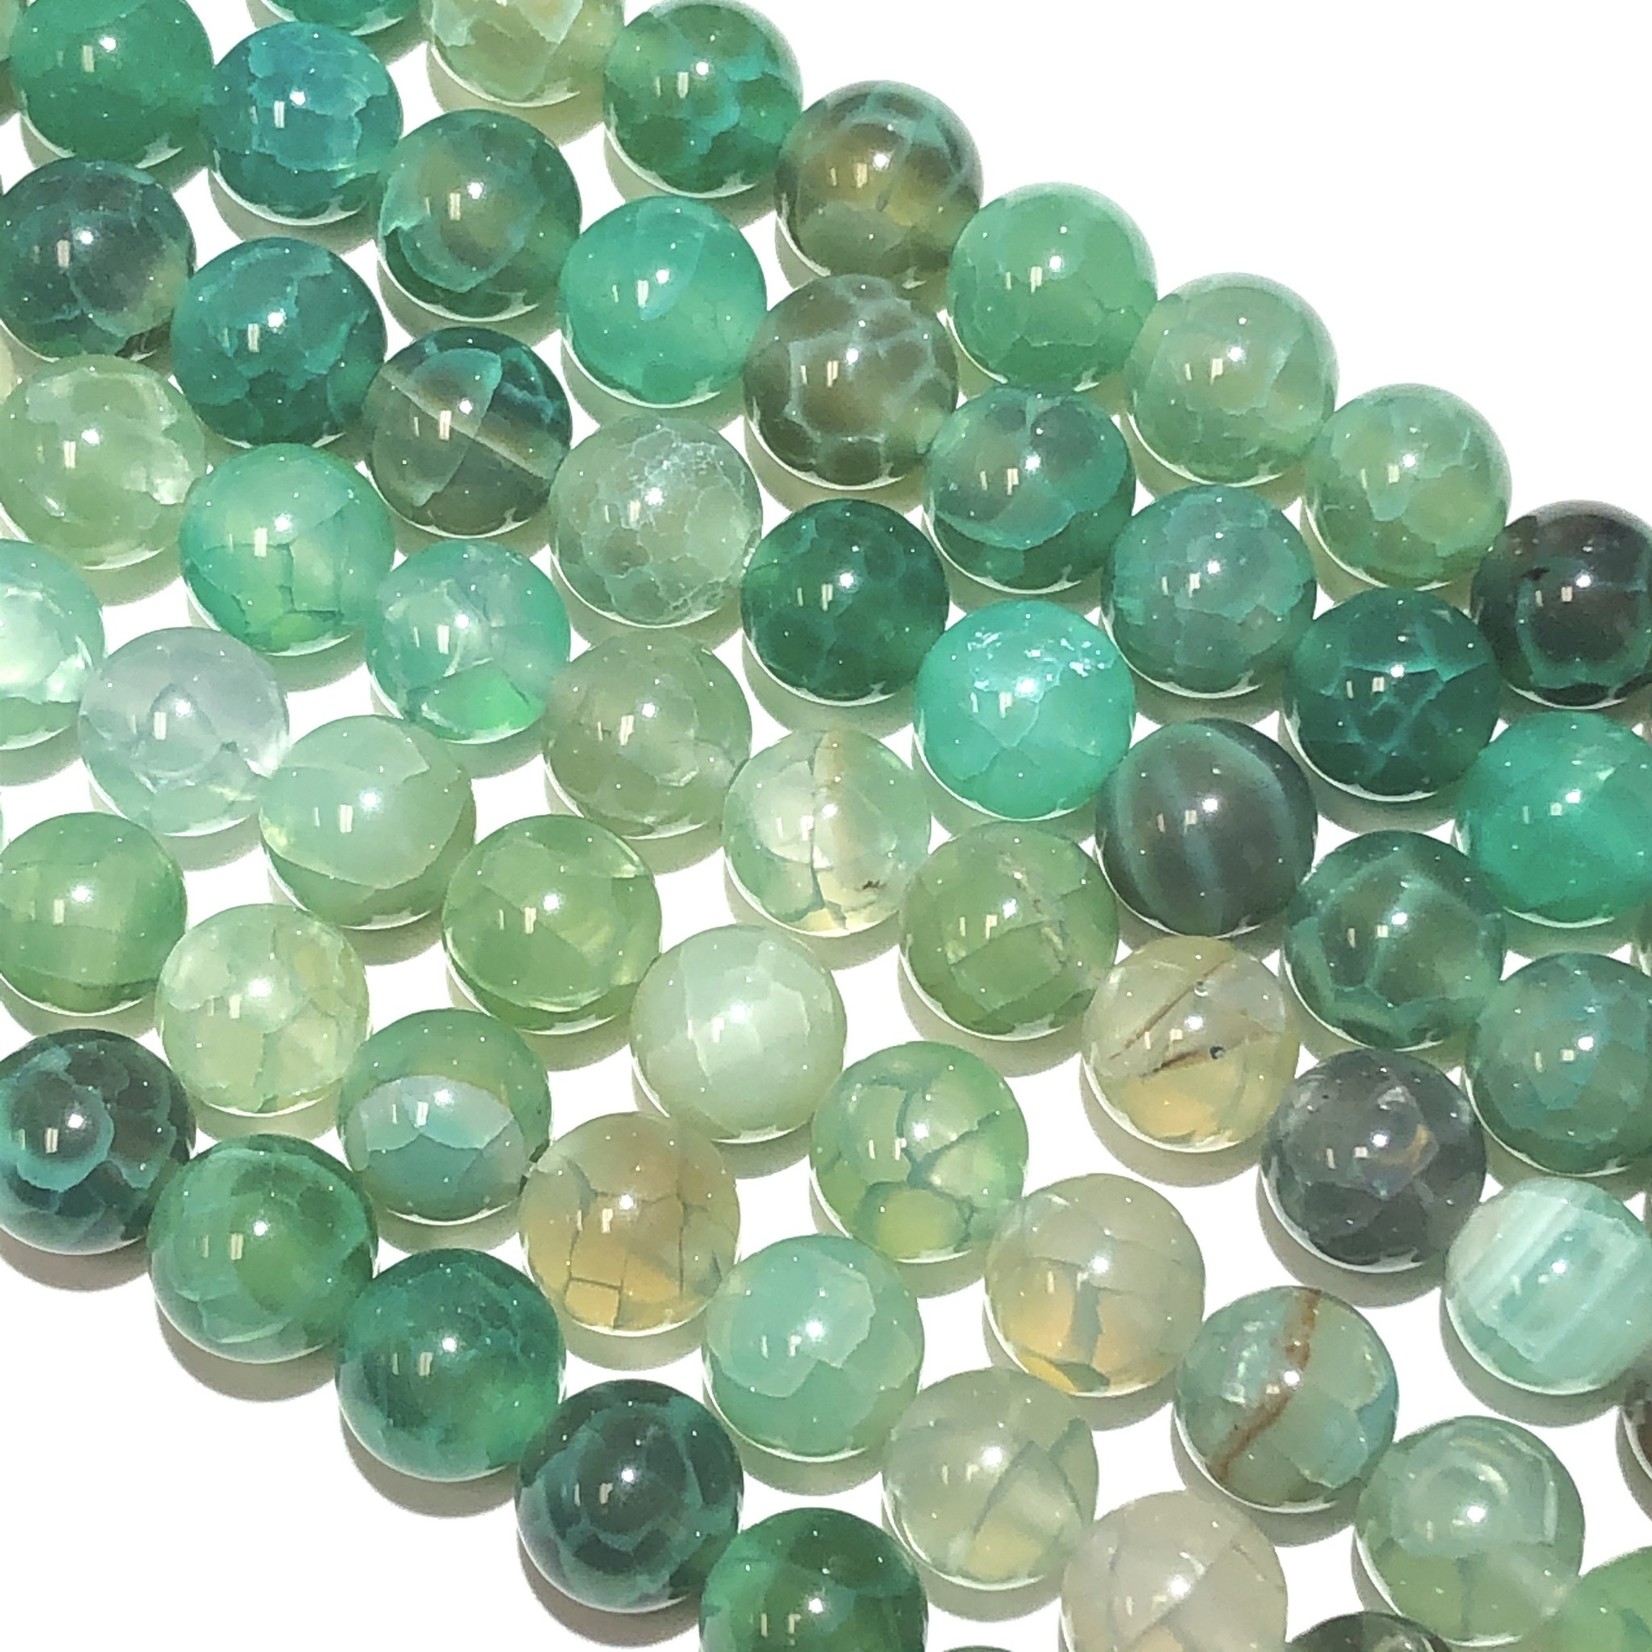 Natural Cracked AGATE Dyed Green 8mm Round